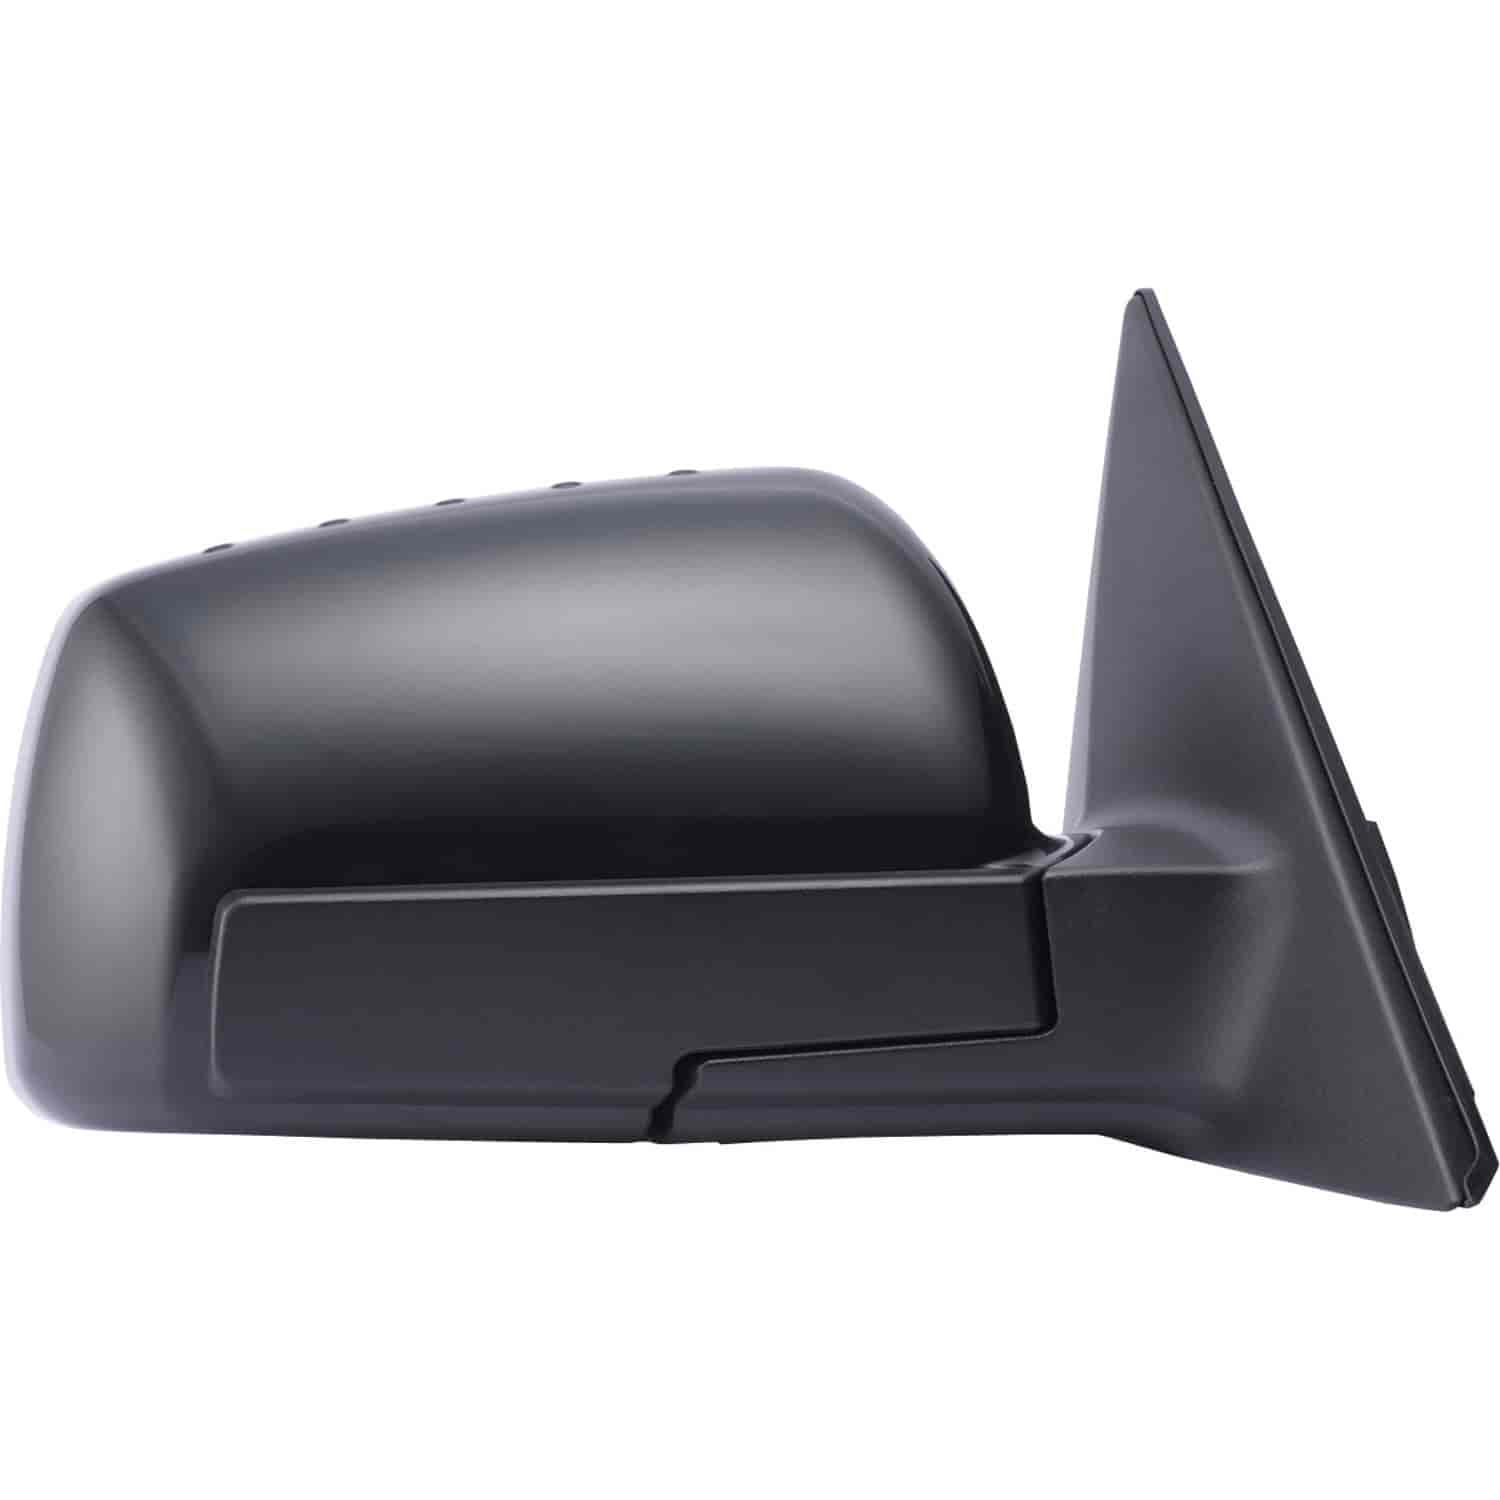 OEM Style Replacement mirror for 09-13 Kia Soul passenger side mirror tested to fit and function lik